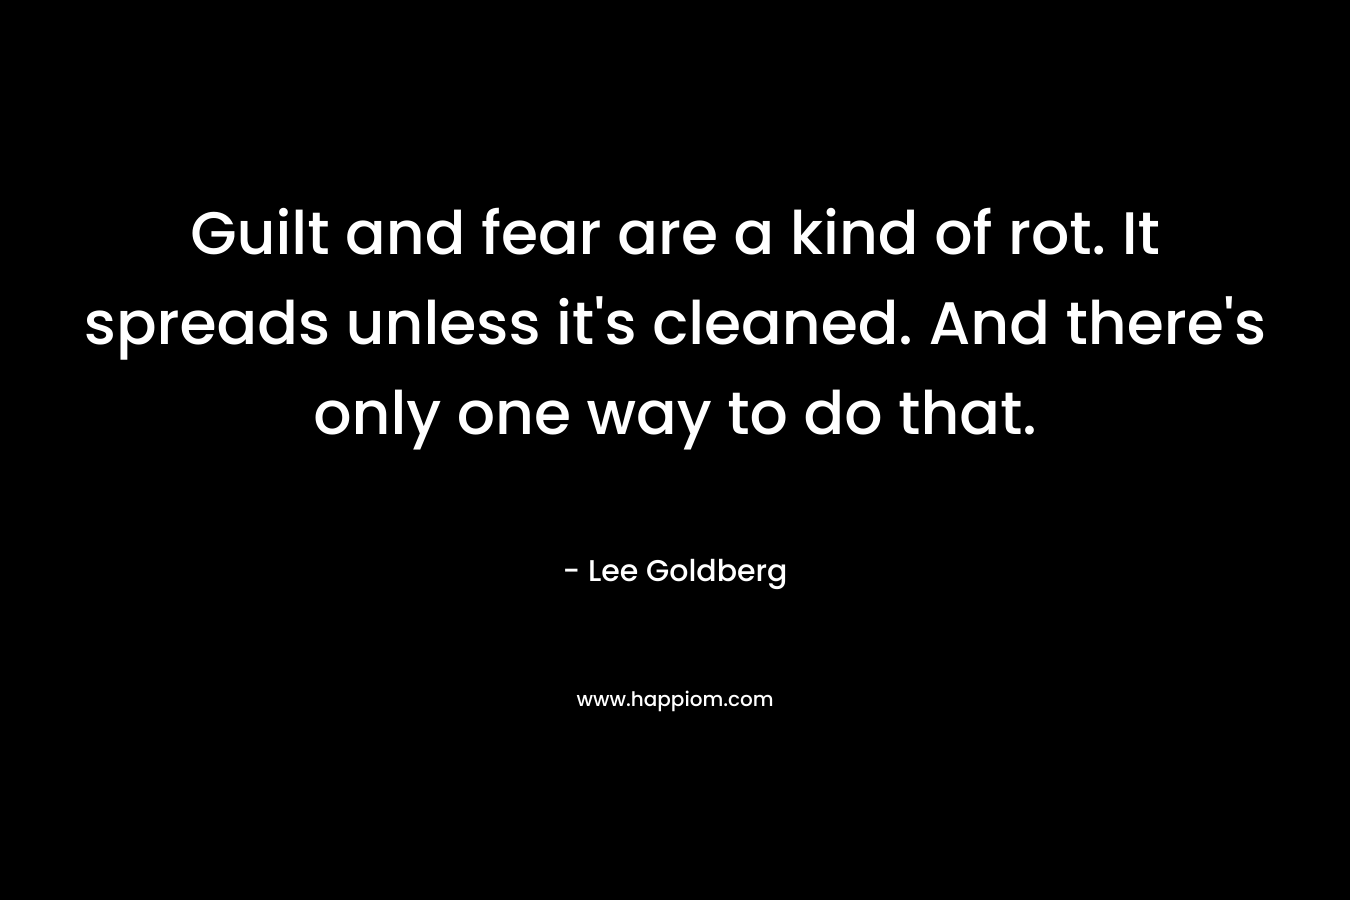 Guilt and fear are a kind of rot. It spreads unless it’s cleaned. And there’s only one way to do that. – Lee Goldberg